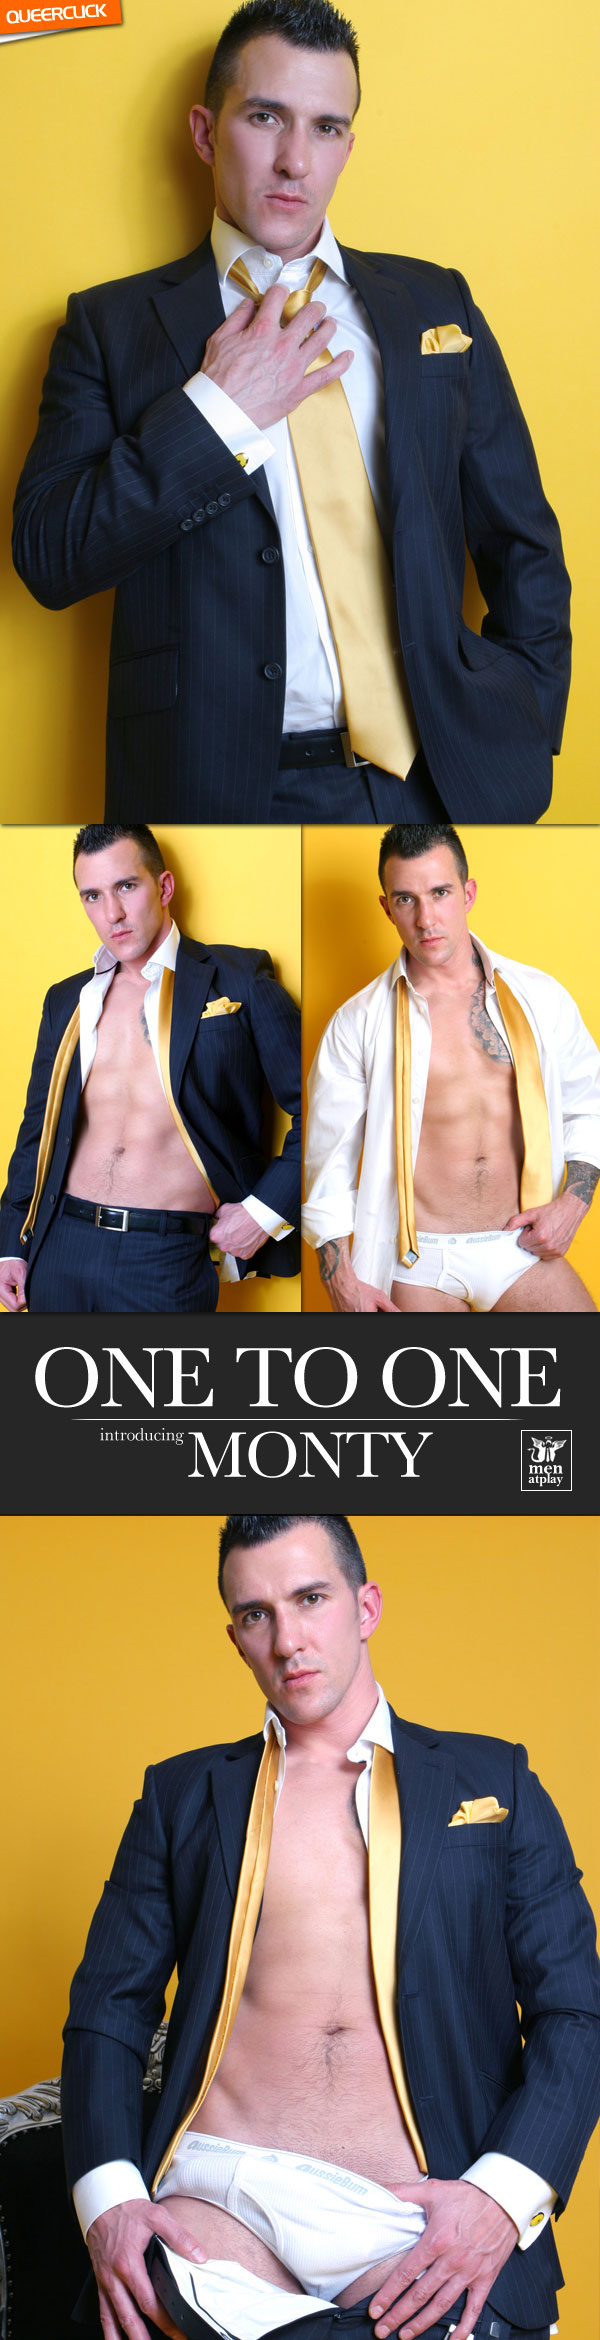 Men At Play: One To One - Monty